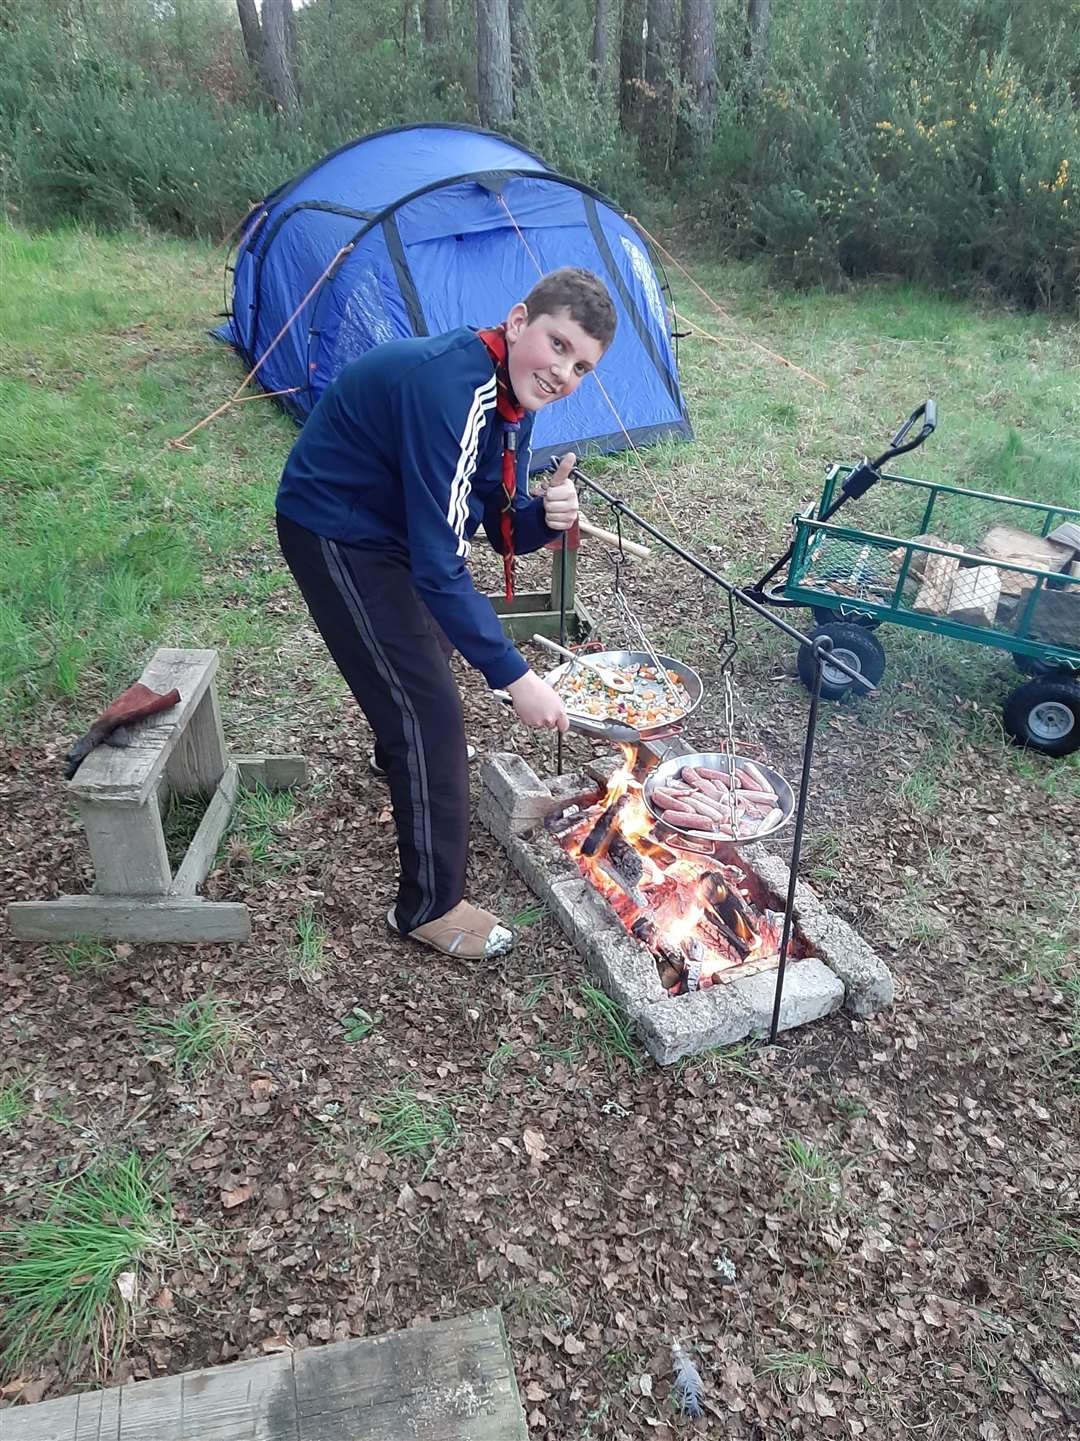 Marcus McEwan (12) camped in his garden and cooked his supper over an open fire.